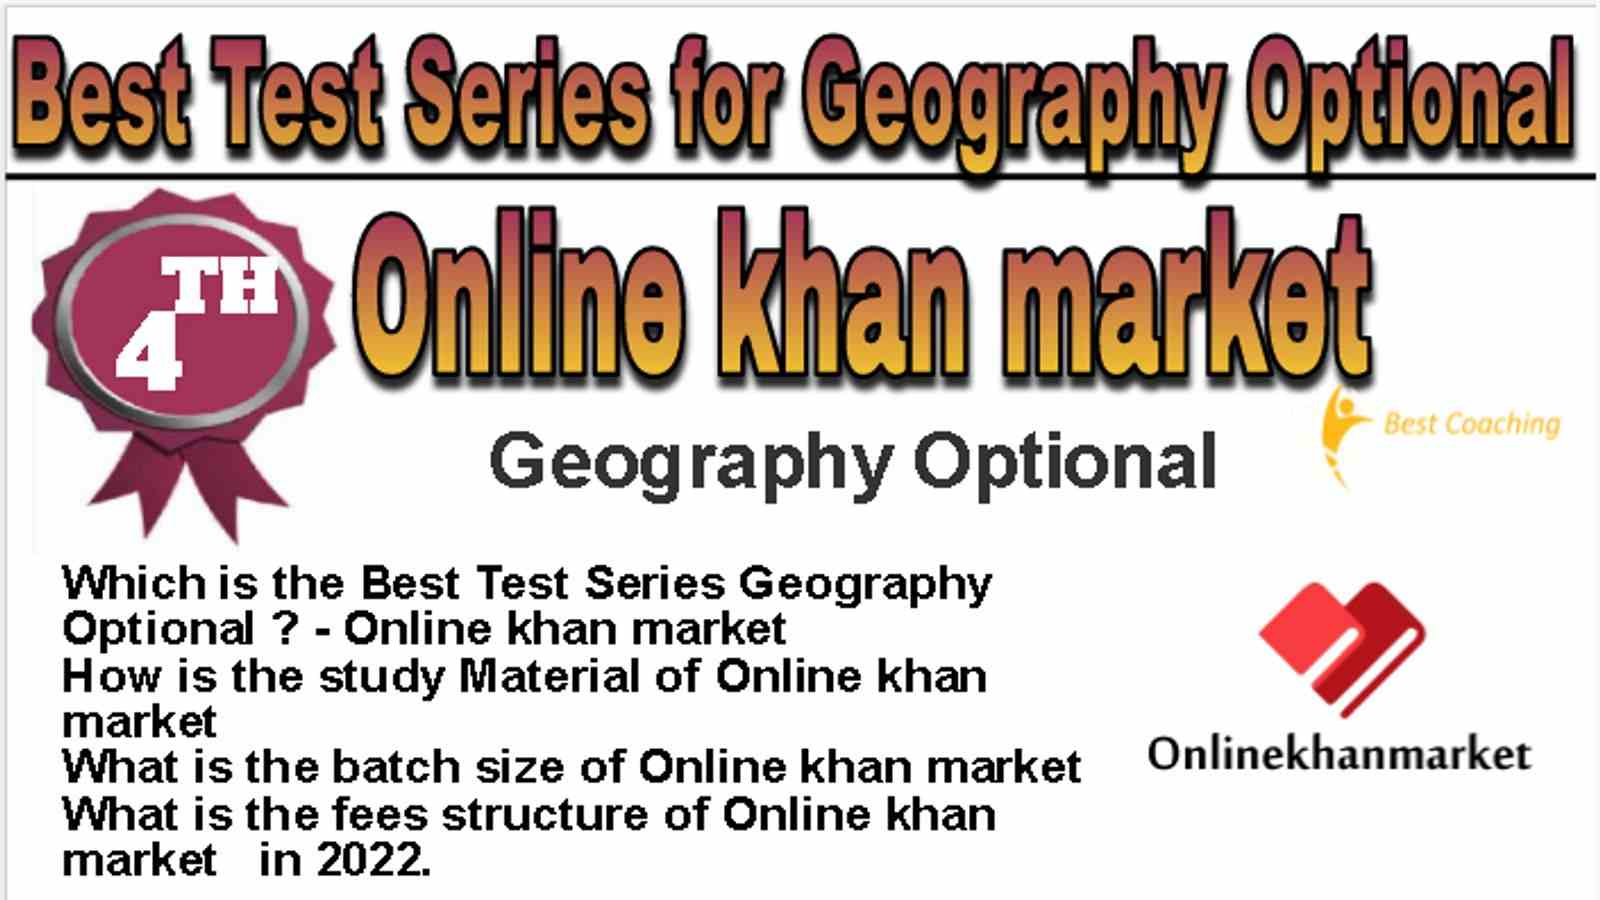 Rank 4 Best Test Series for Geography Optional